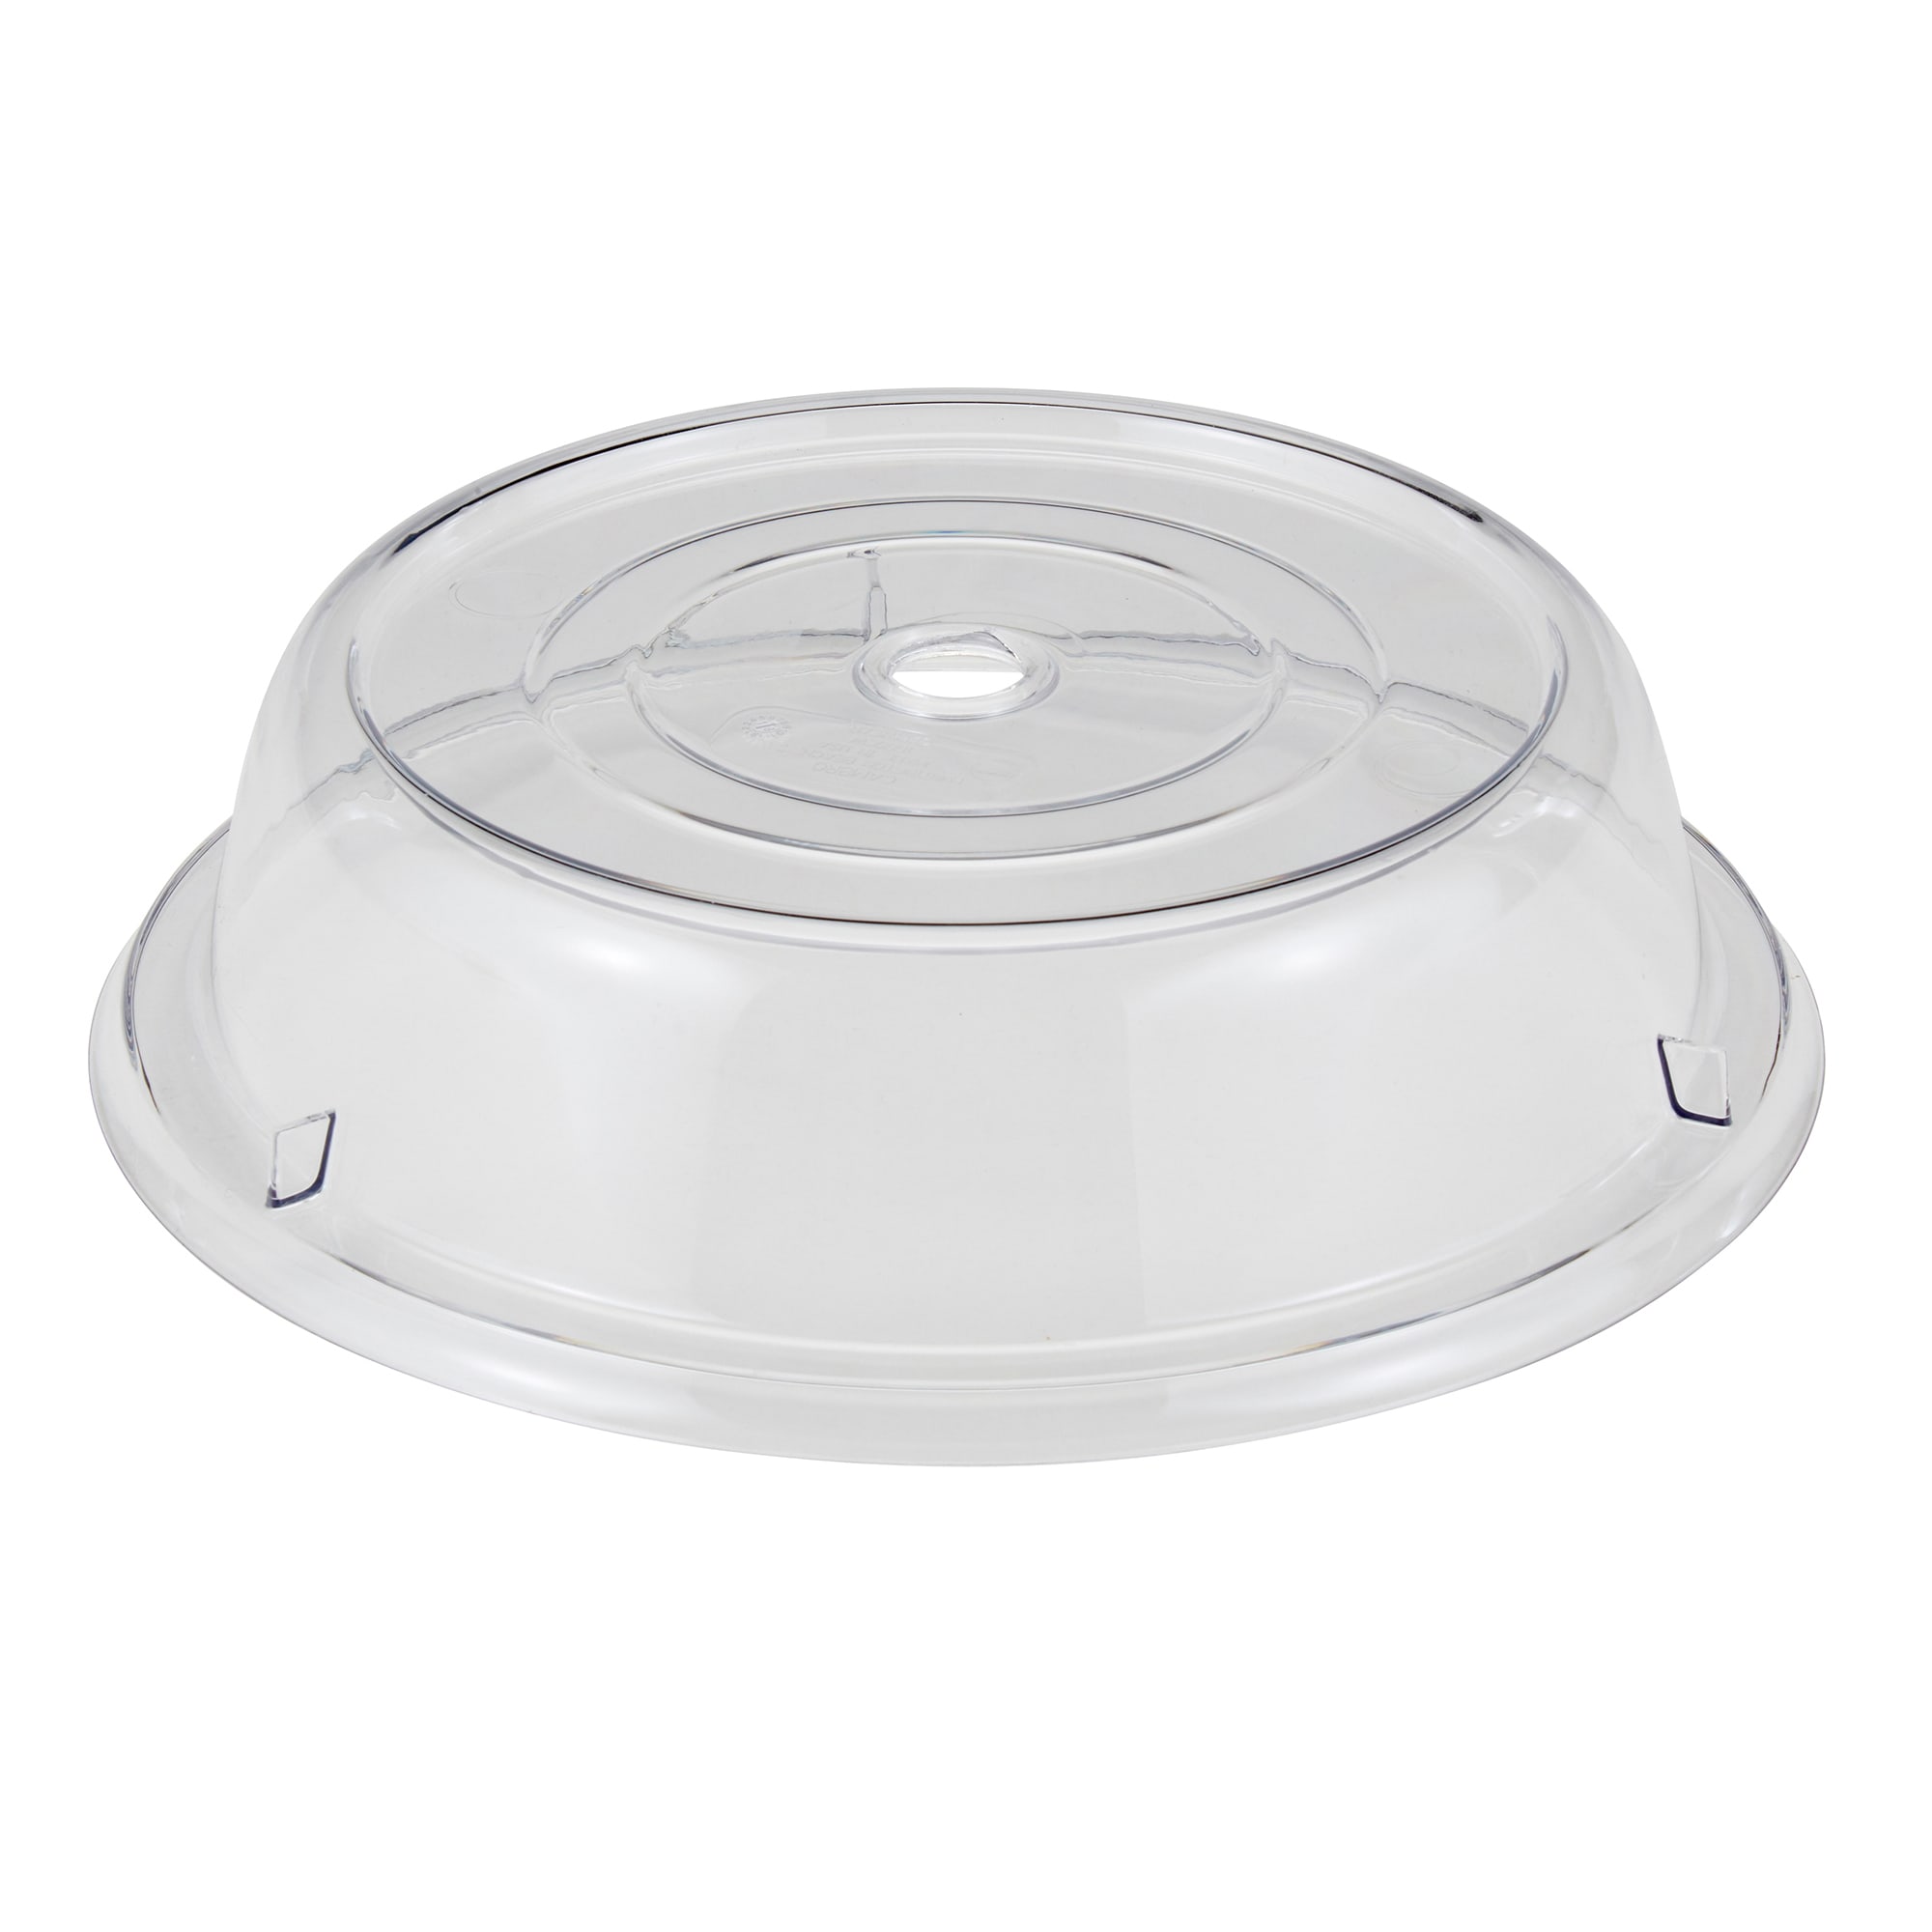 Cambro 1007CW152 Camwear® Camcover® Clear 10-5/8 Plate Cover